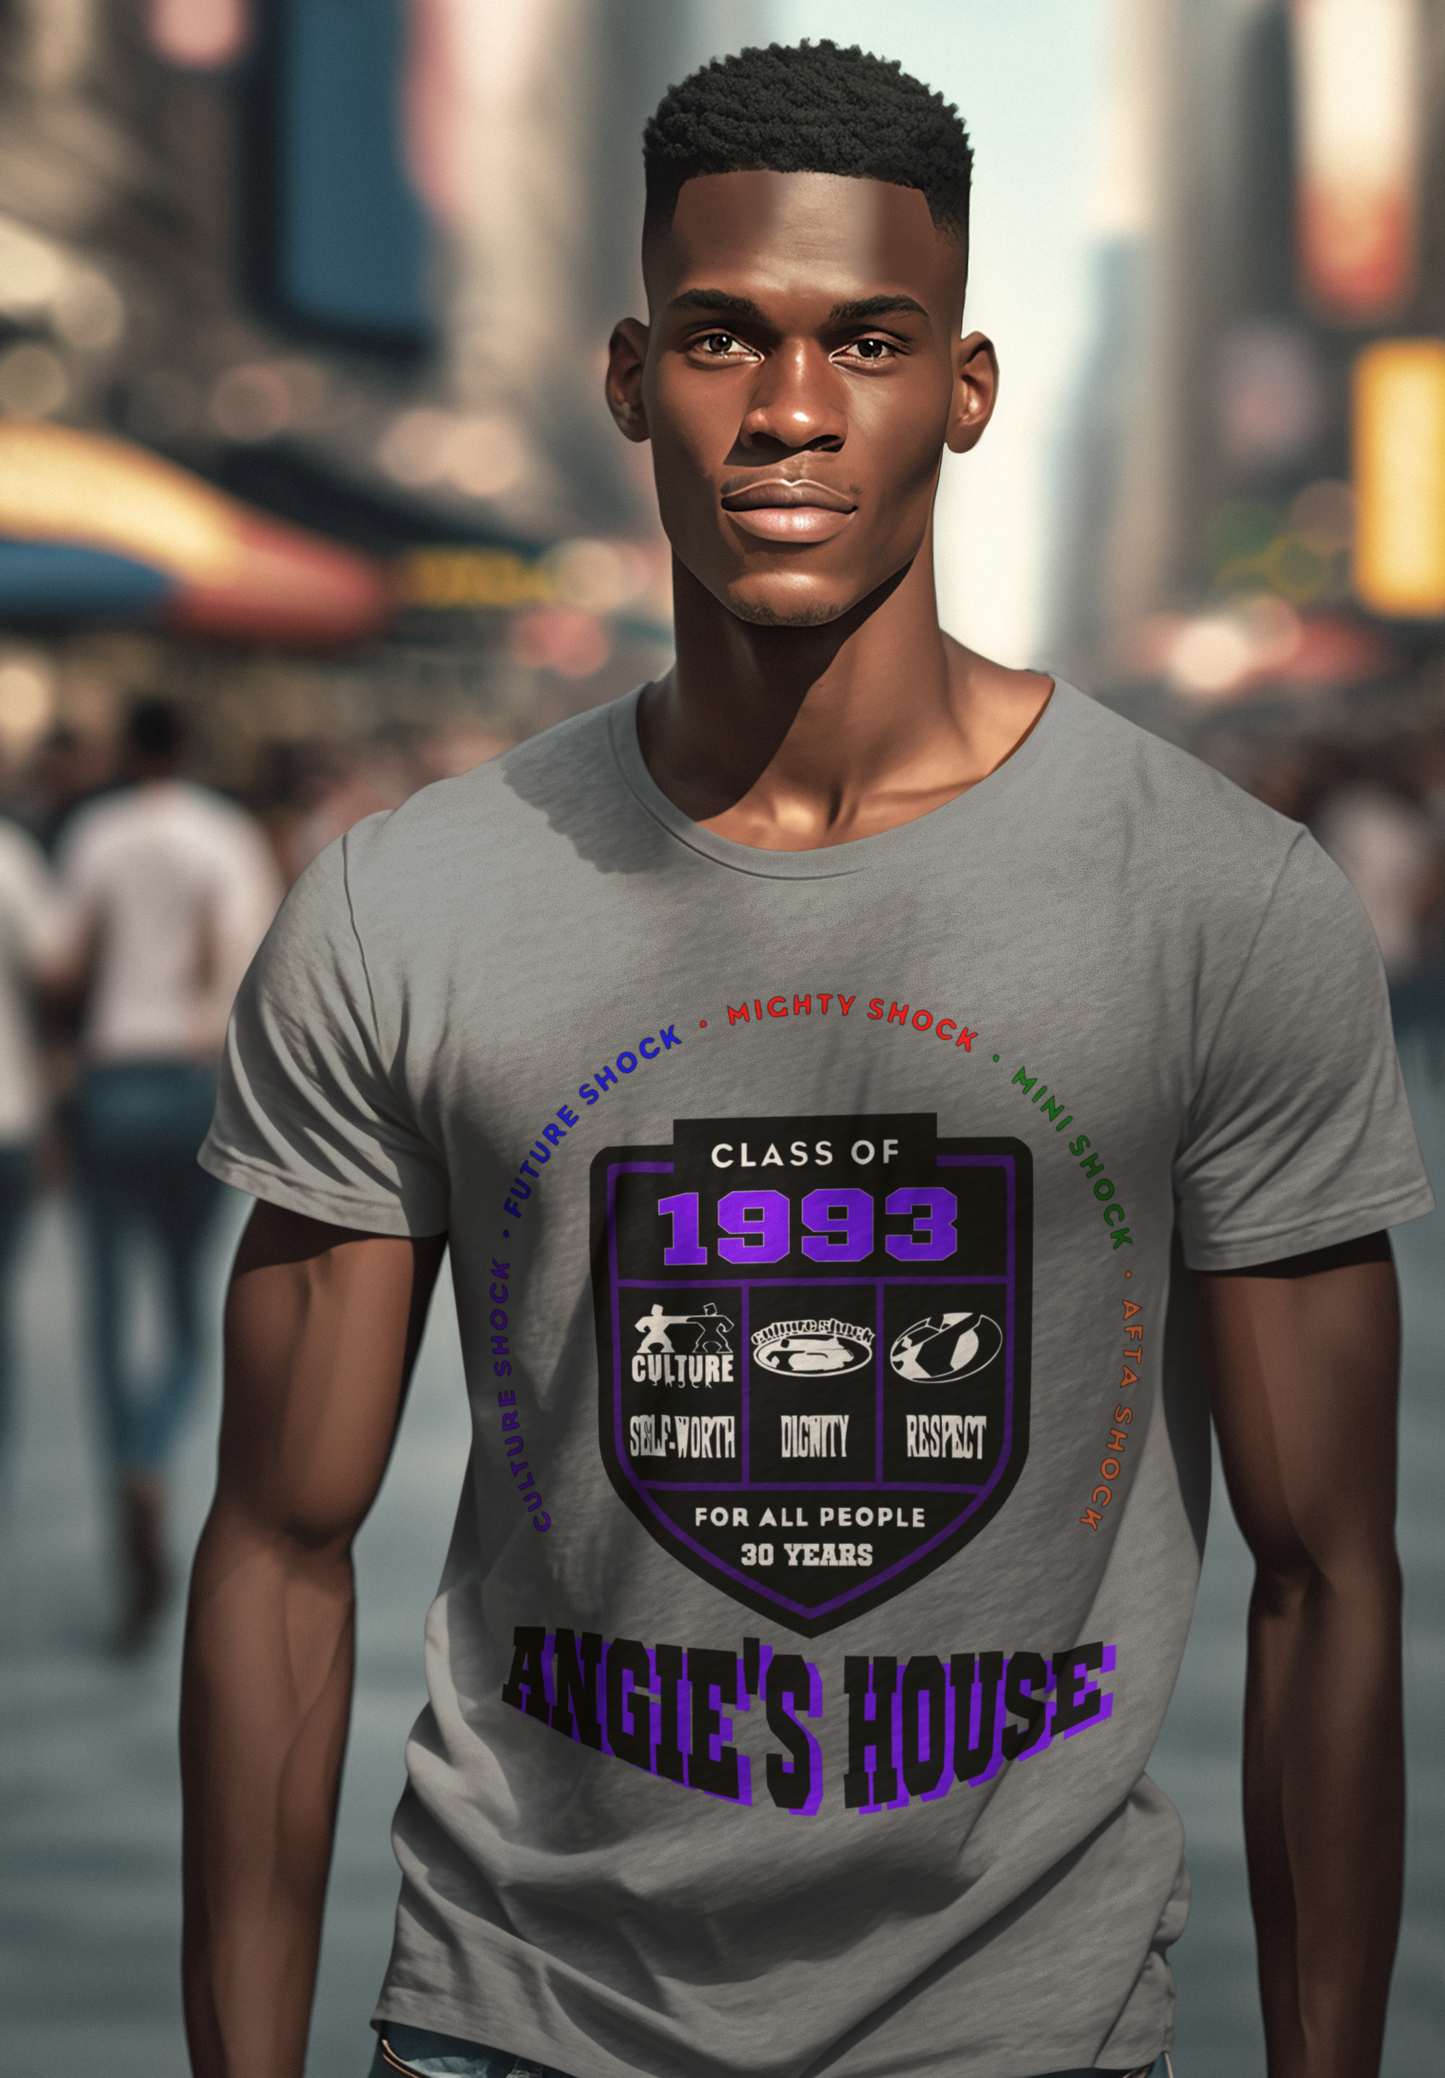 Angie's House T-shirt